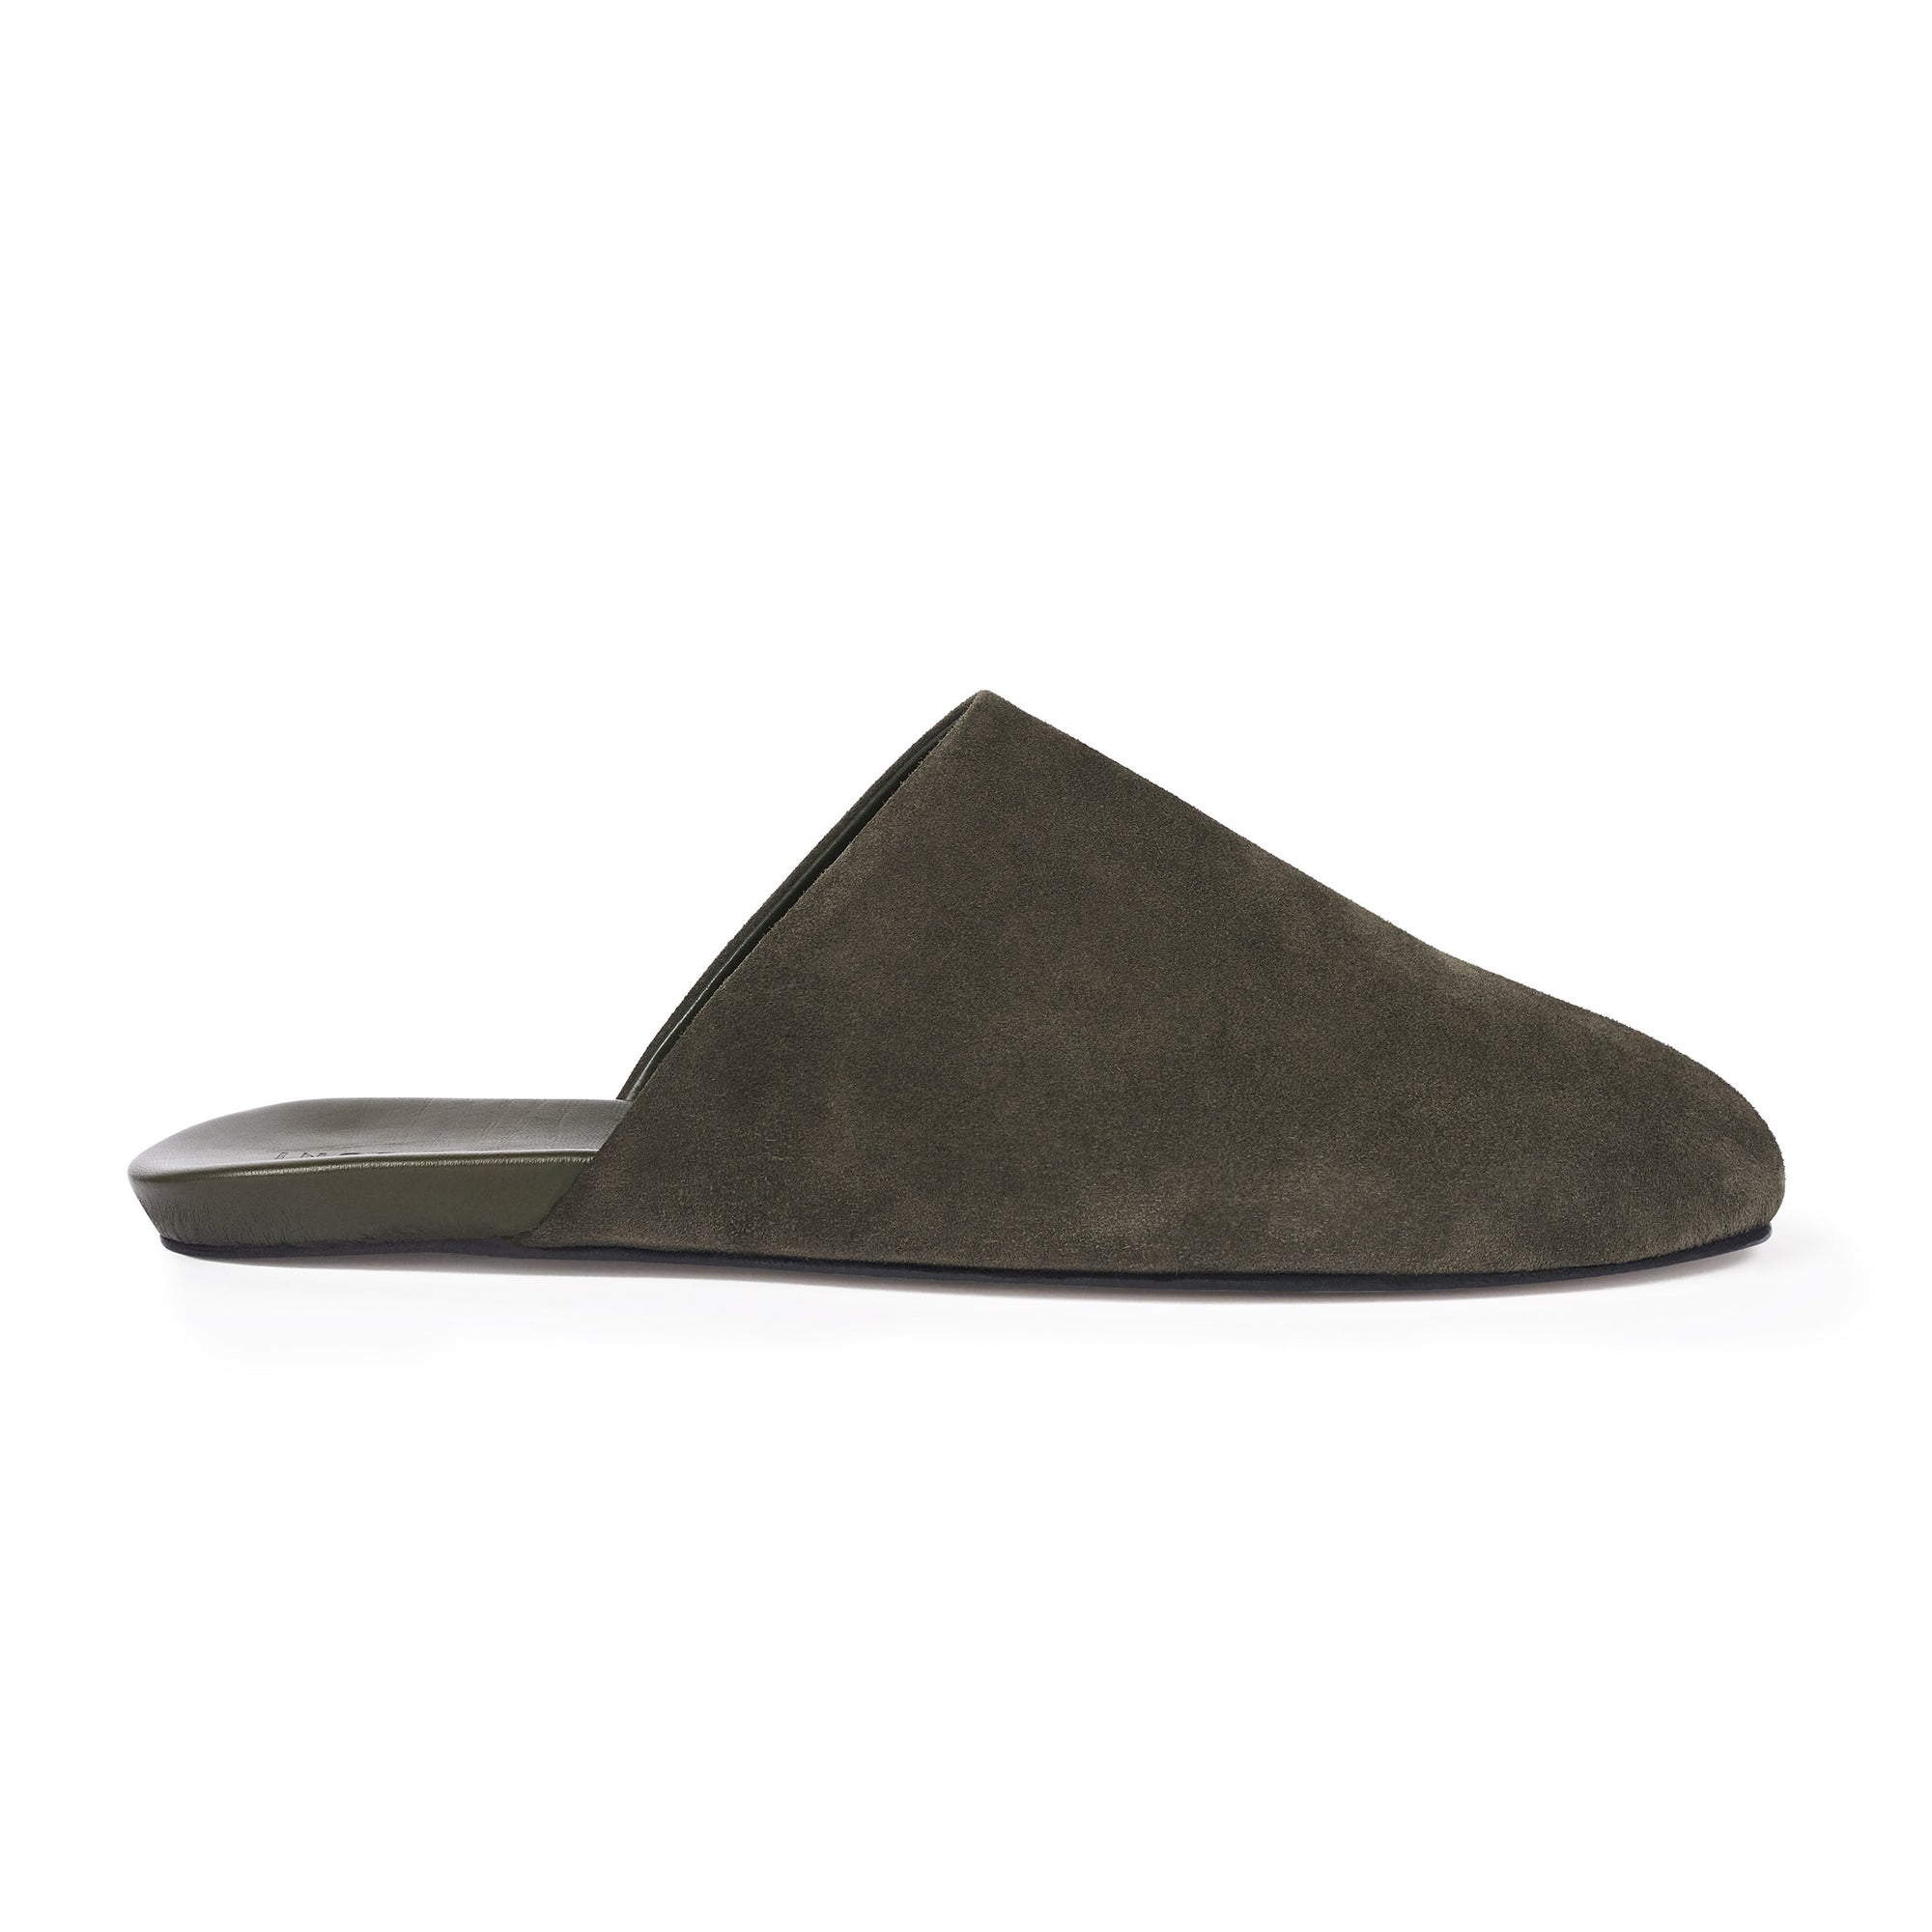 Inabo Men's Slider slipper in army suede and leather outer sole in profile